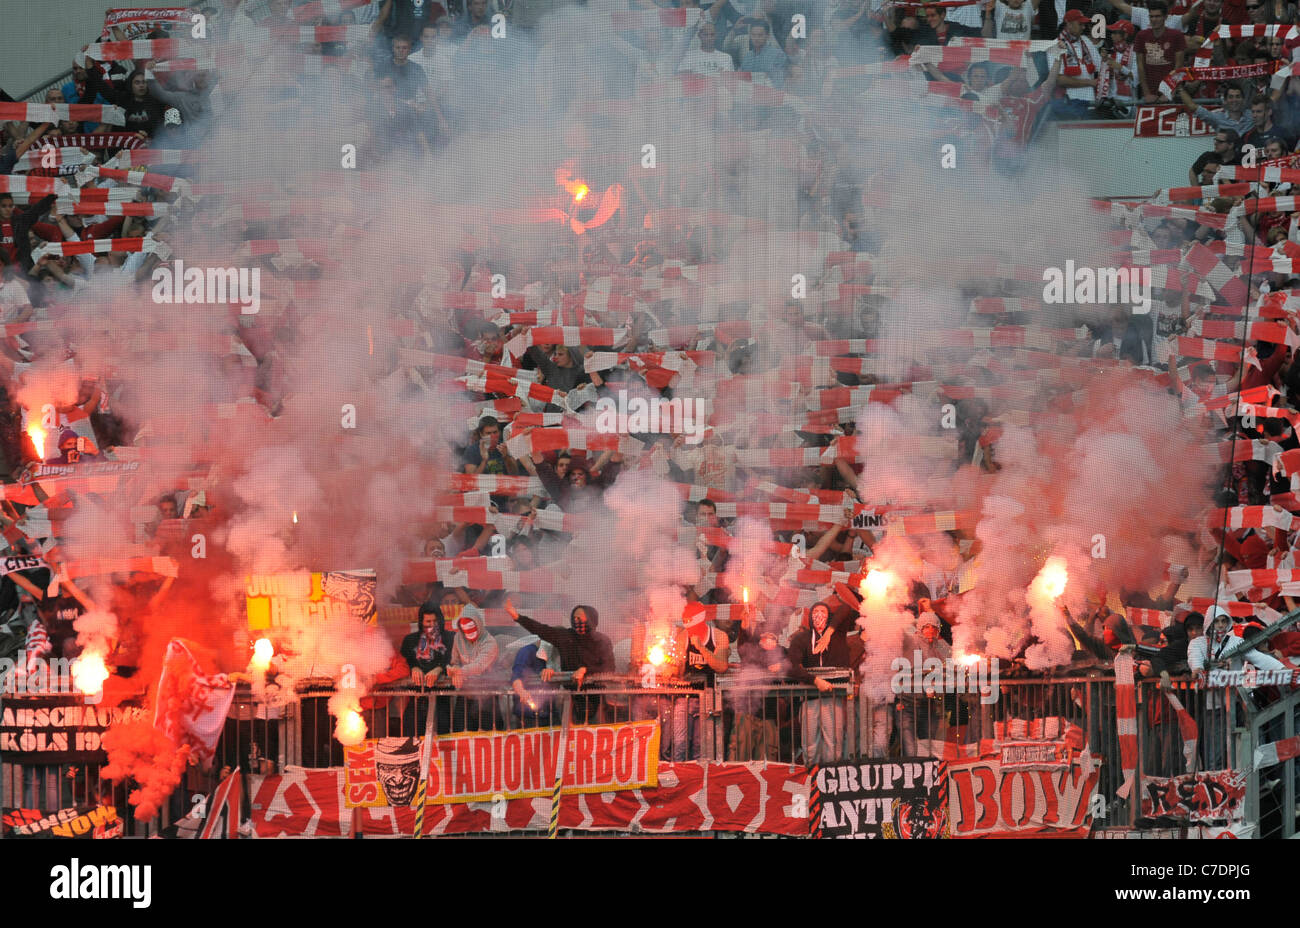 football fans burn red flares Stock Photo